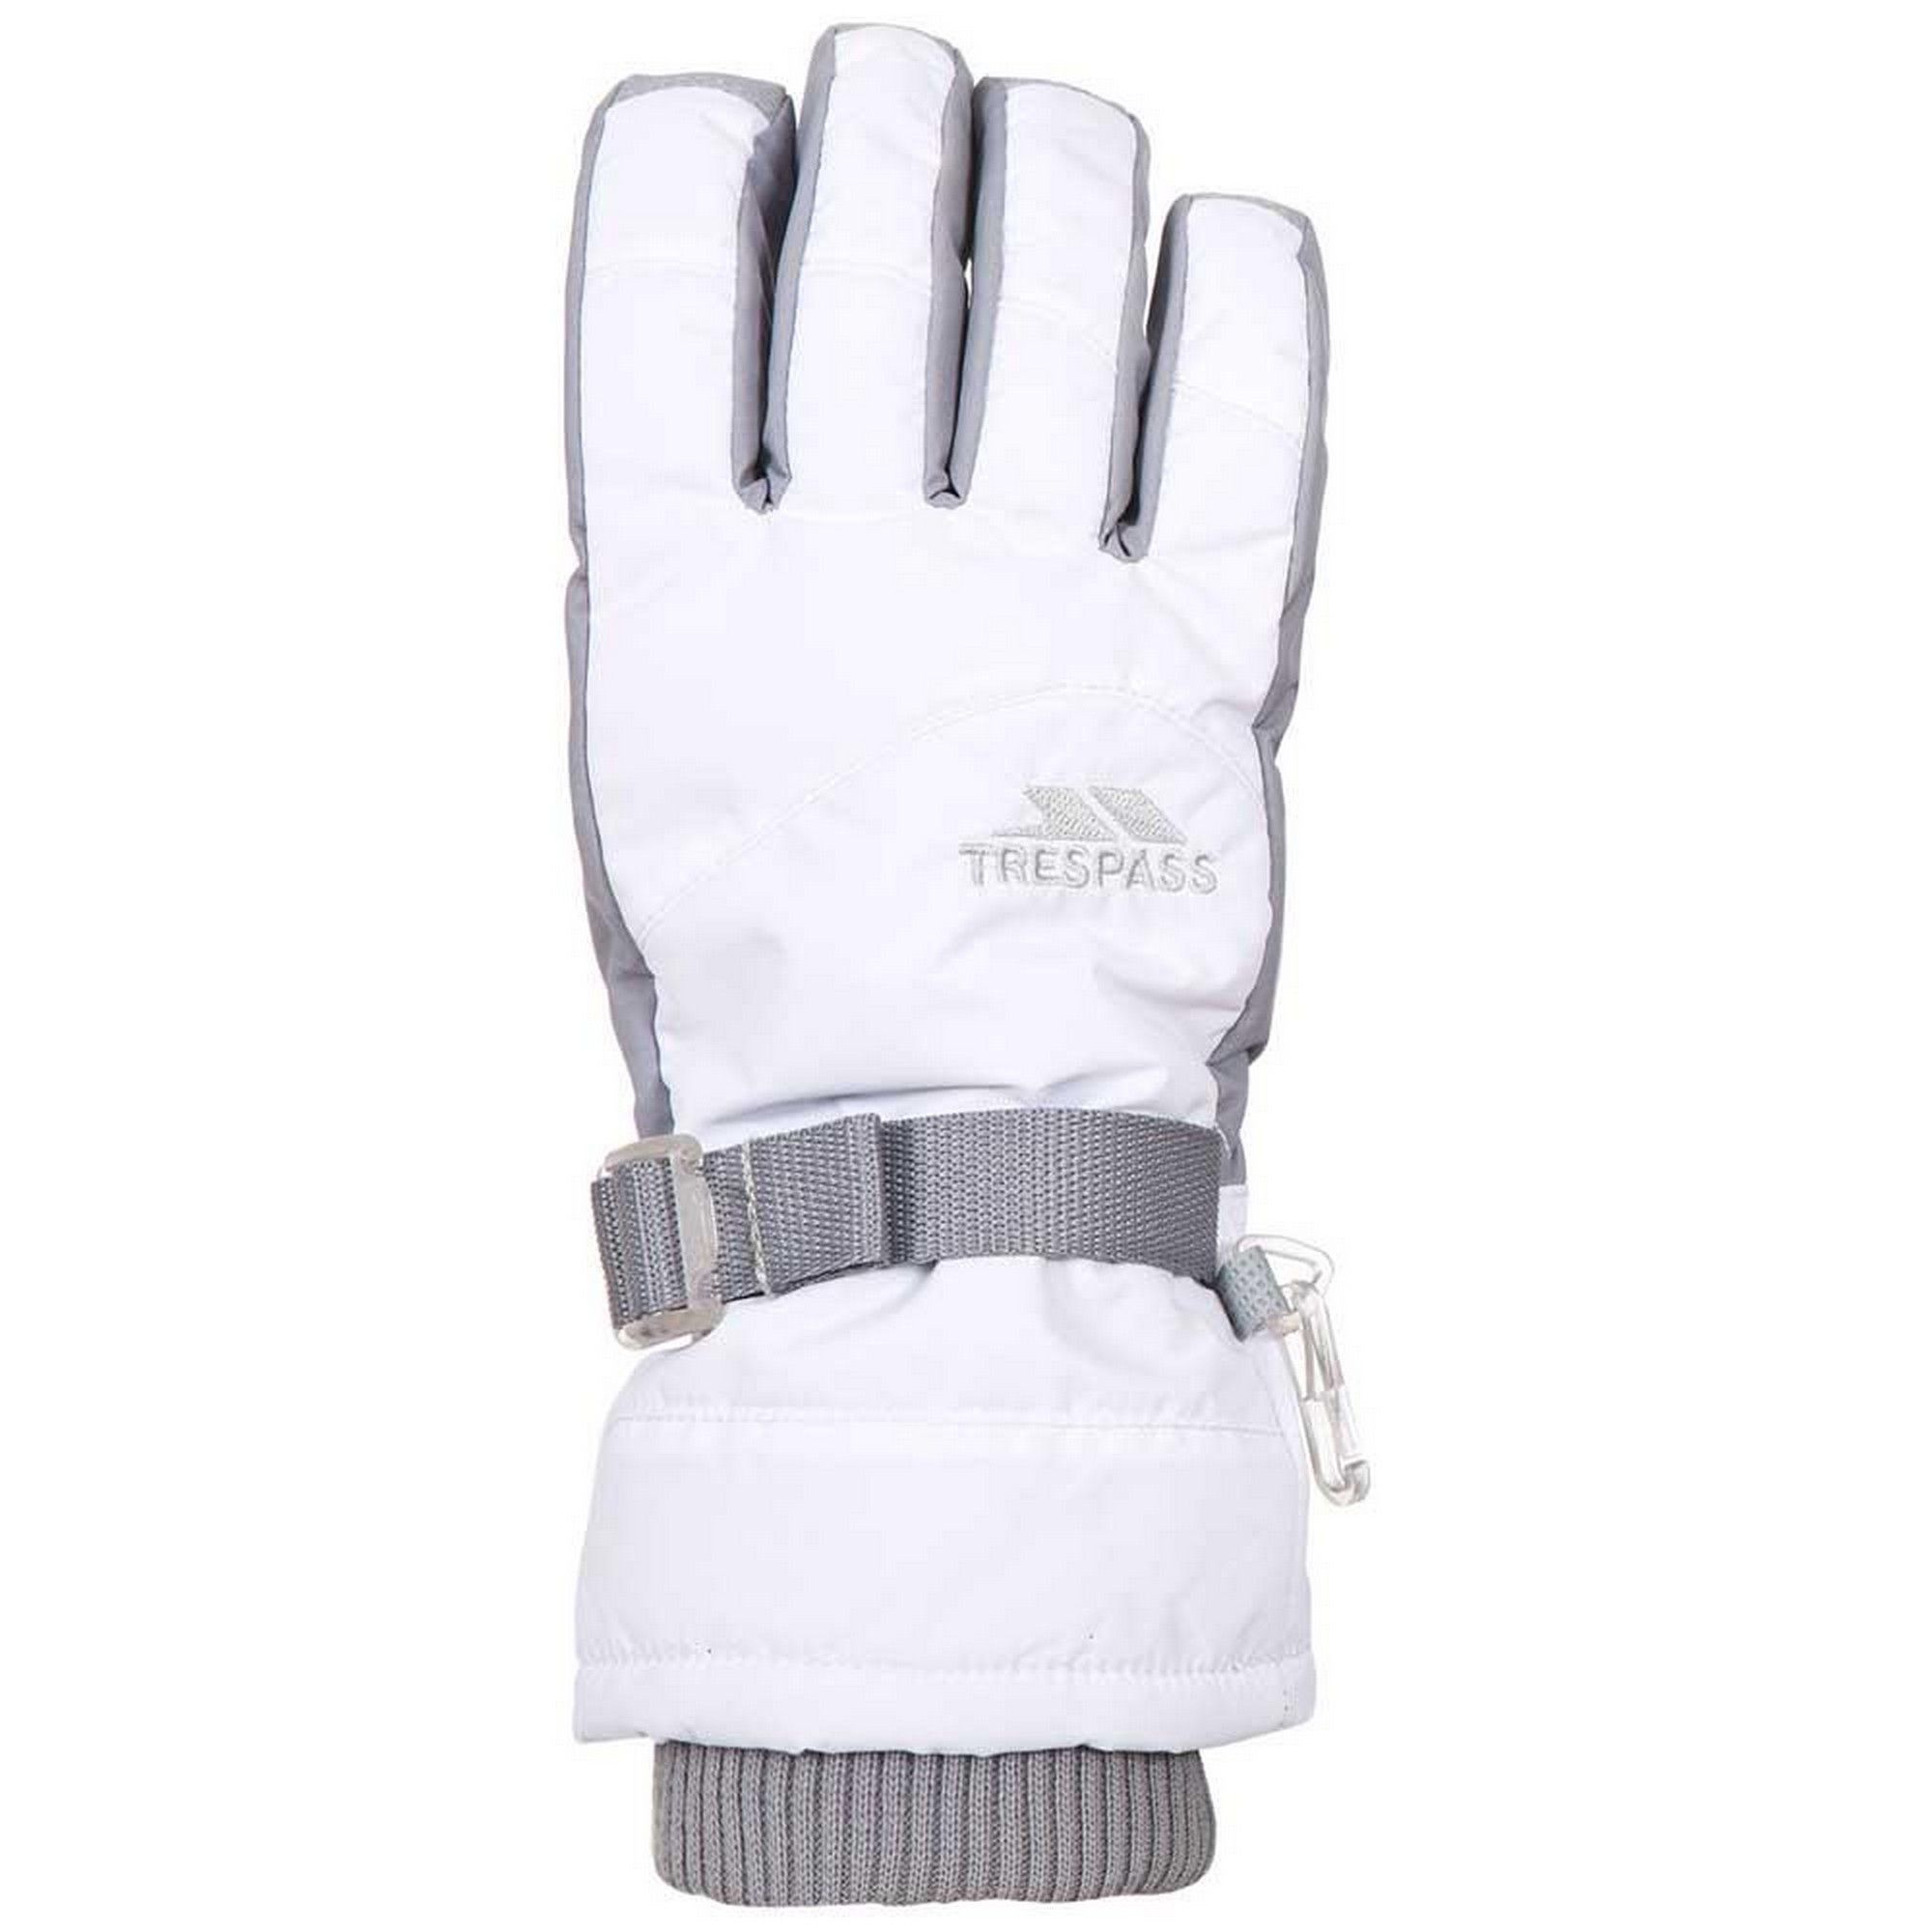 Lightly padded waterproof and breathable gloves. Adjustable wrist strap. Adjustable glove retainer. Goggle wipe functionality. Material: Shell: 100% Polyester. Palm: 100% Polyurethane. Lining: 100% Polyester. Filling: 100% Polyester.